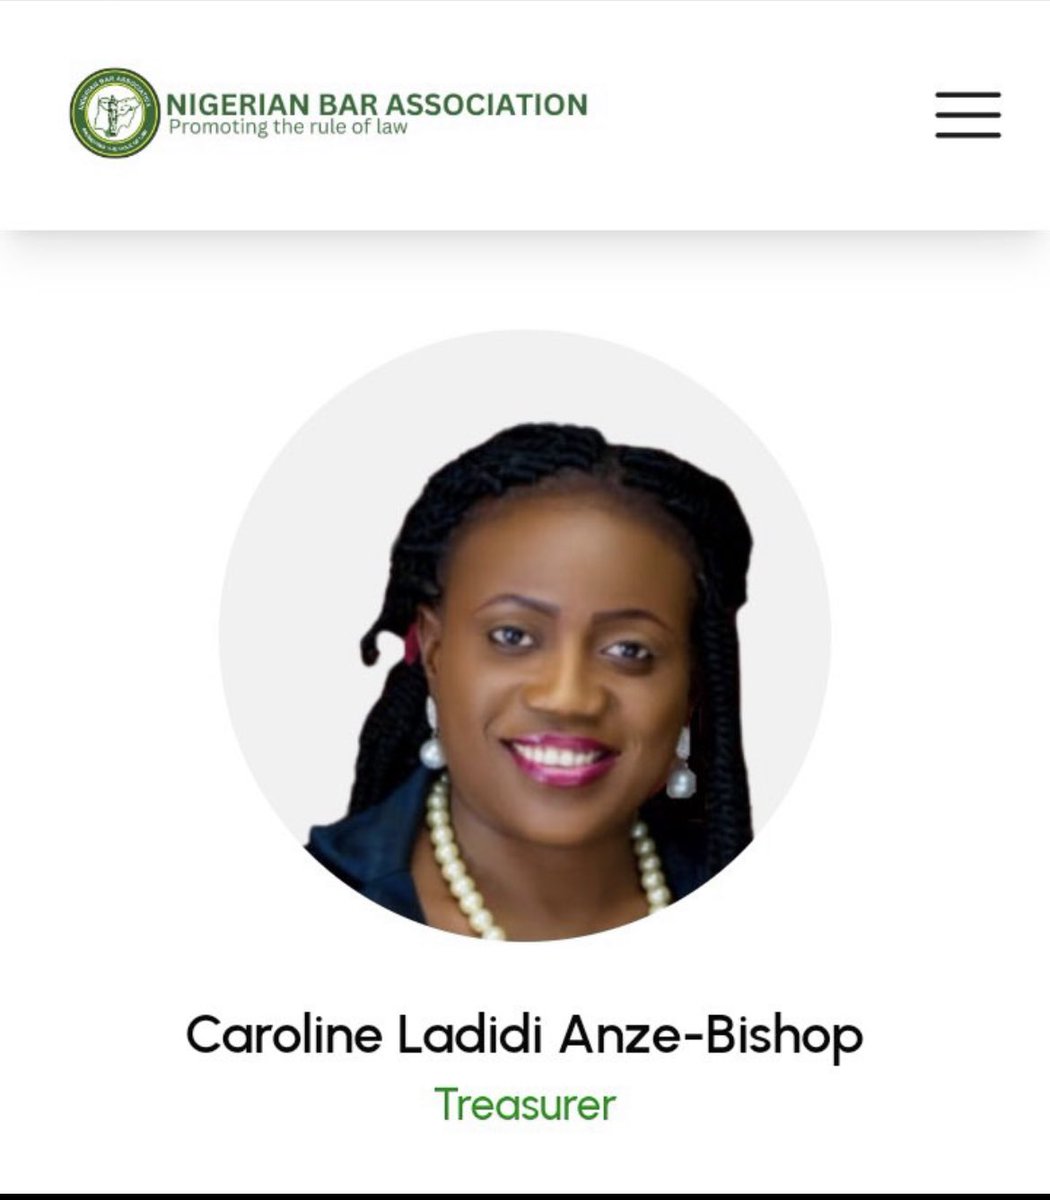 What an example have you become!
You have no idea the impact your bravery would have in a country where cowardice is expected, integrity is lacking and corruption is celebrated. Weldone Caroline Anne-Bishop!
#NigerianBarAssociation